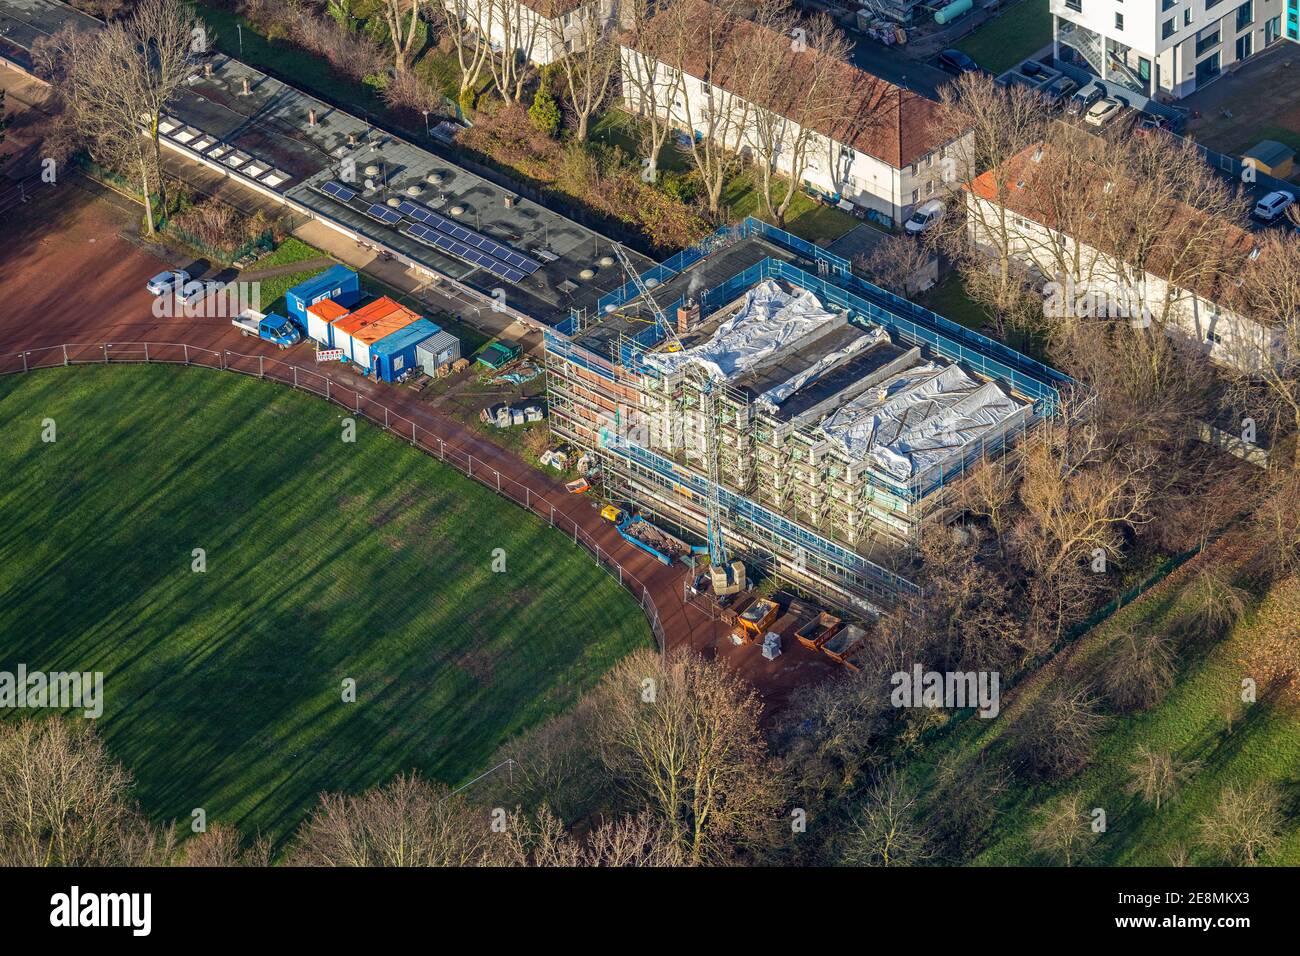 , Aerial view, construction site indoor swimming pool, Otto-Hahn-Gymnasium Herne, Herne, Ruhr area, North Rhine-Westphalia, Germany, construction work Stock Photo